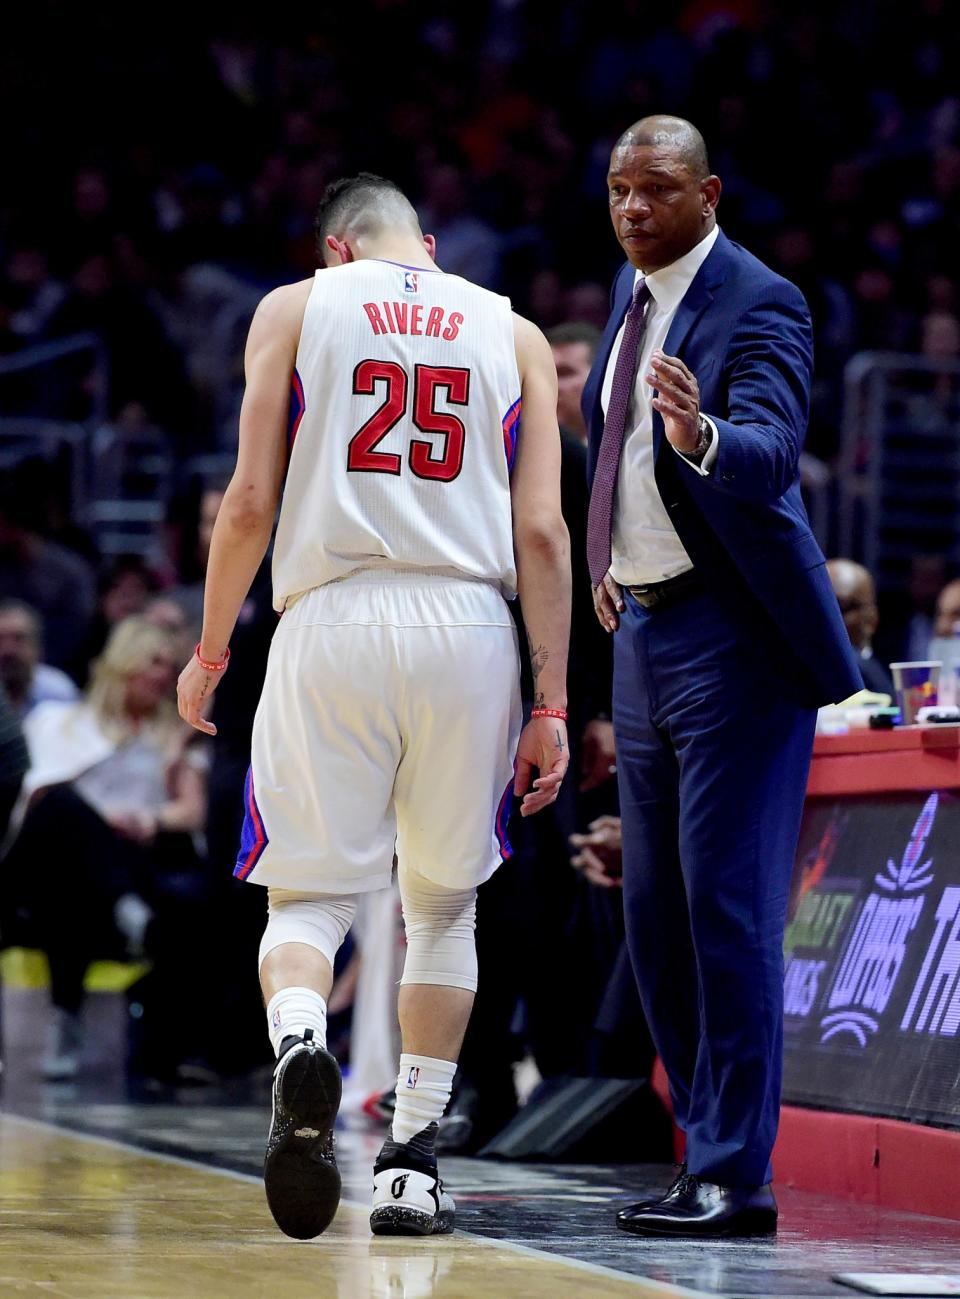 Los Angeles Clippers coach Doc Rivers reacts as Austin Rivers leaves the court after suffering a hamstring injury during the first half against the Wizards on March 29, 2017. (Harry How/Getty Images)